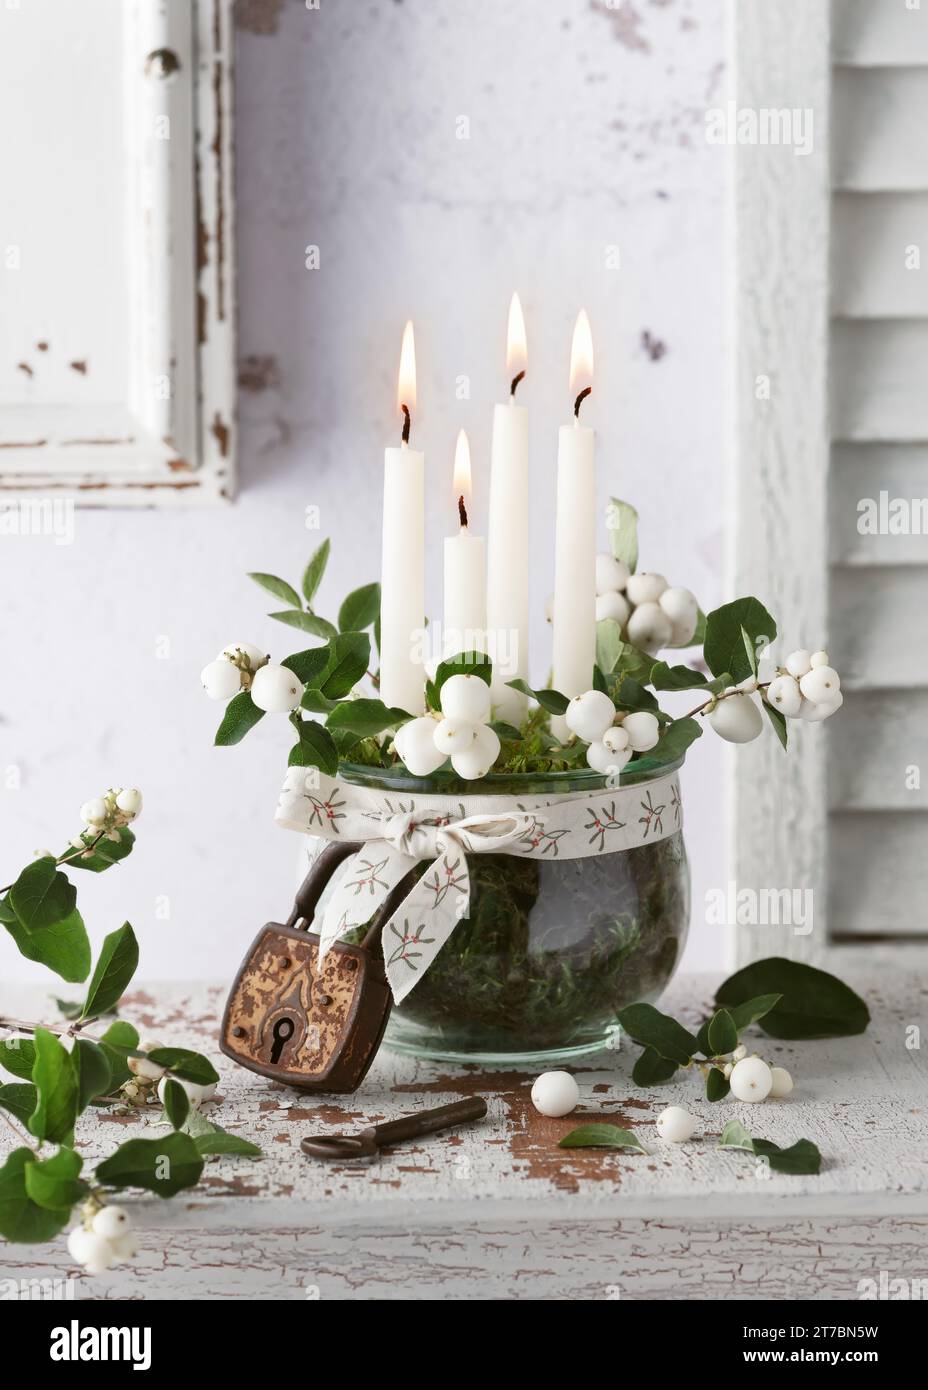 4. Advent. Christmas wreath decoration with white advent candles, snowberry branches in glass jar and vintage lock. Handmade home decoration. Stock Photo